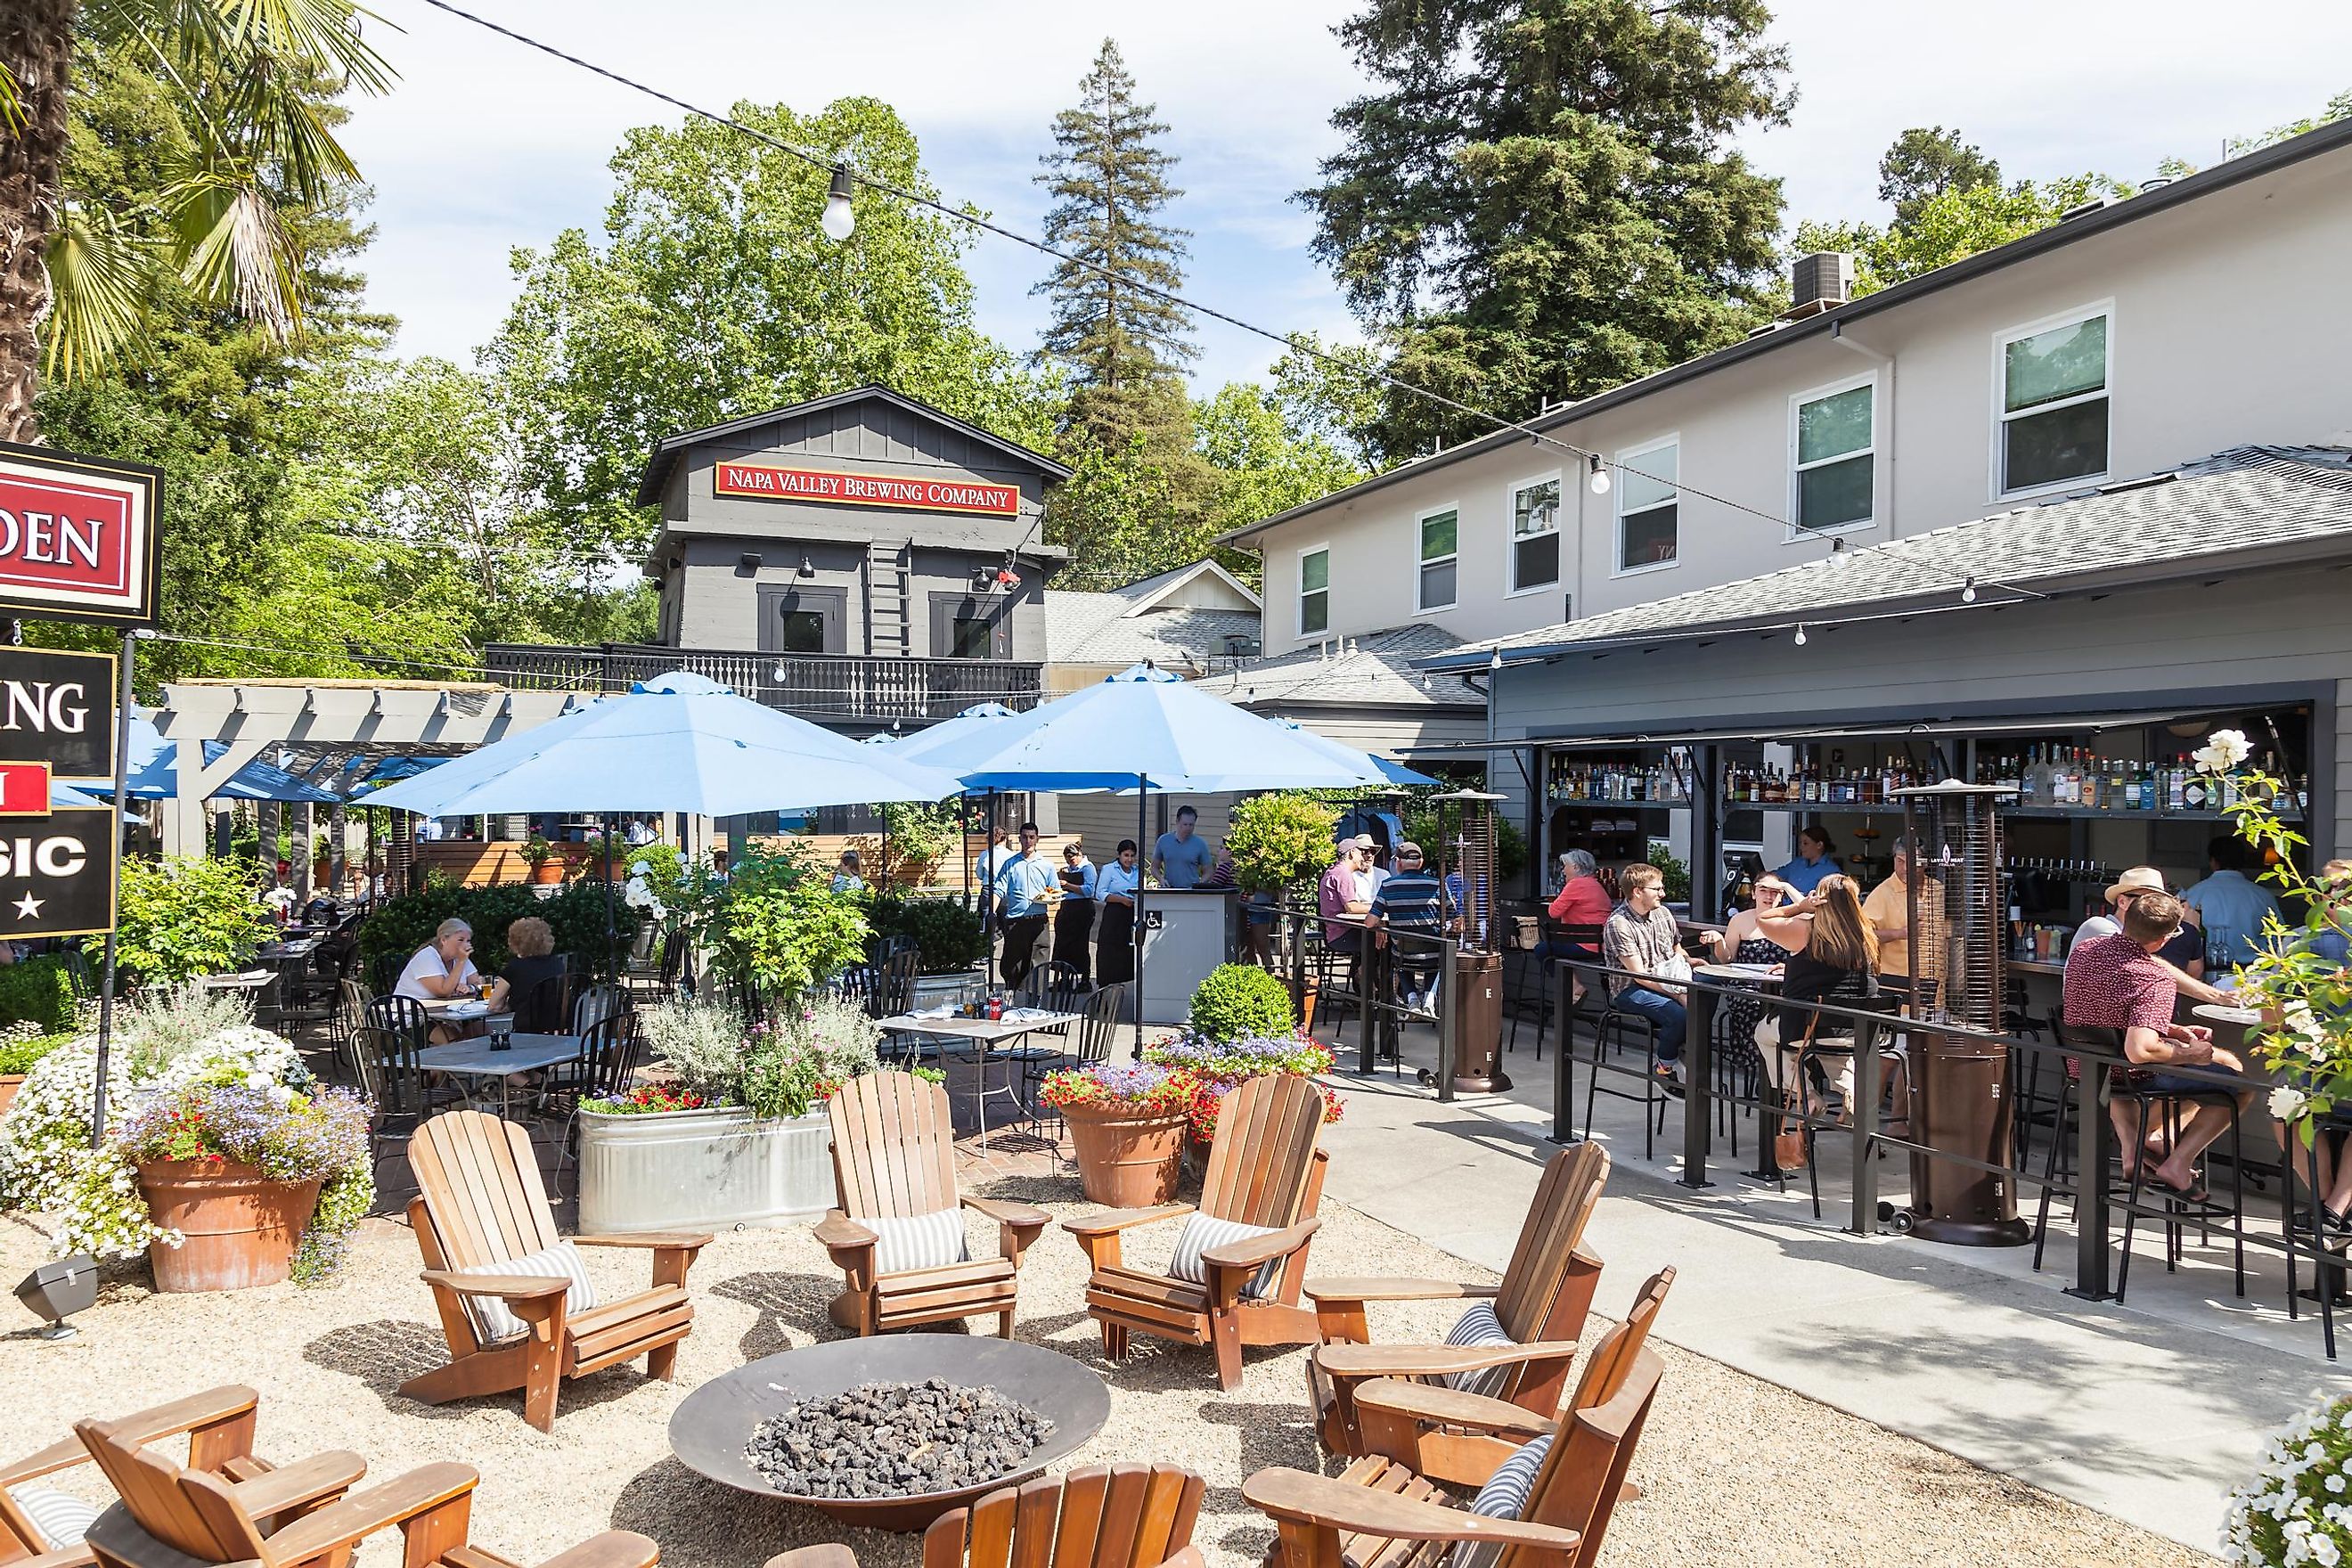 Calistoga,CA-June 10,2019:People enjoy food and drinks in a restaurant in Calistoga